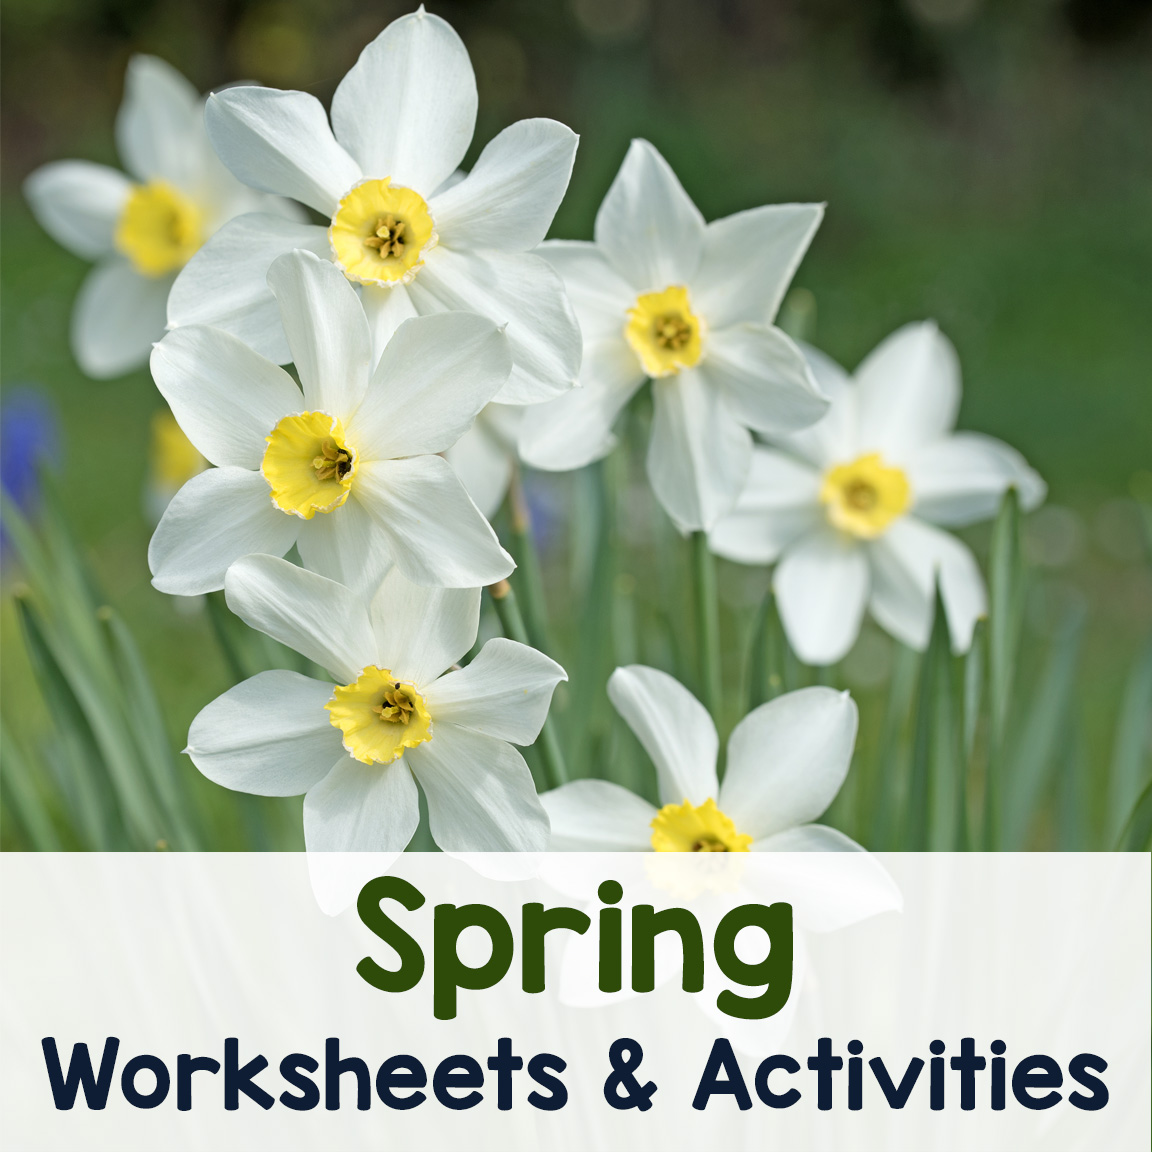 Spring Worksheets and Activities